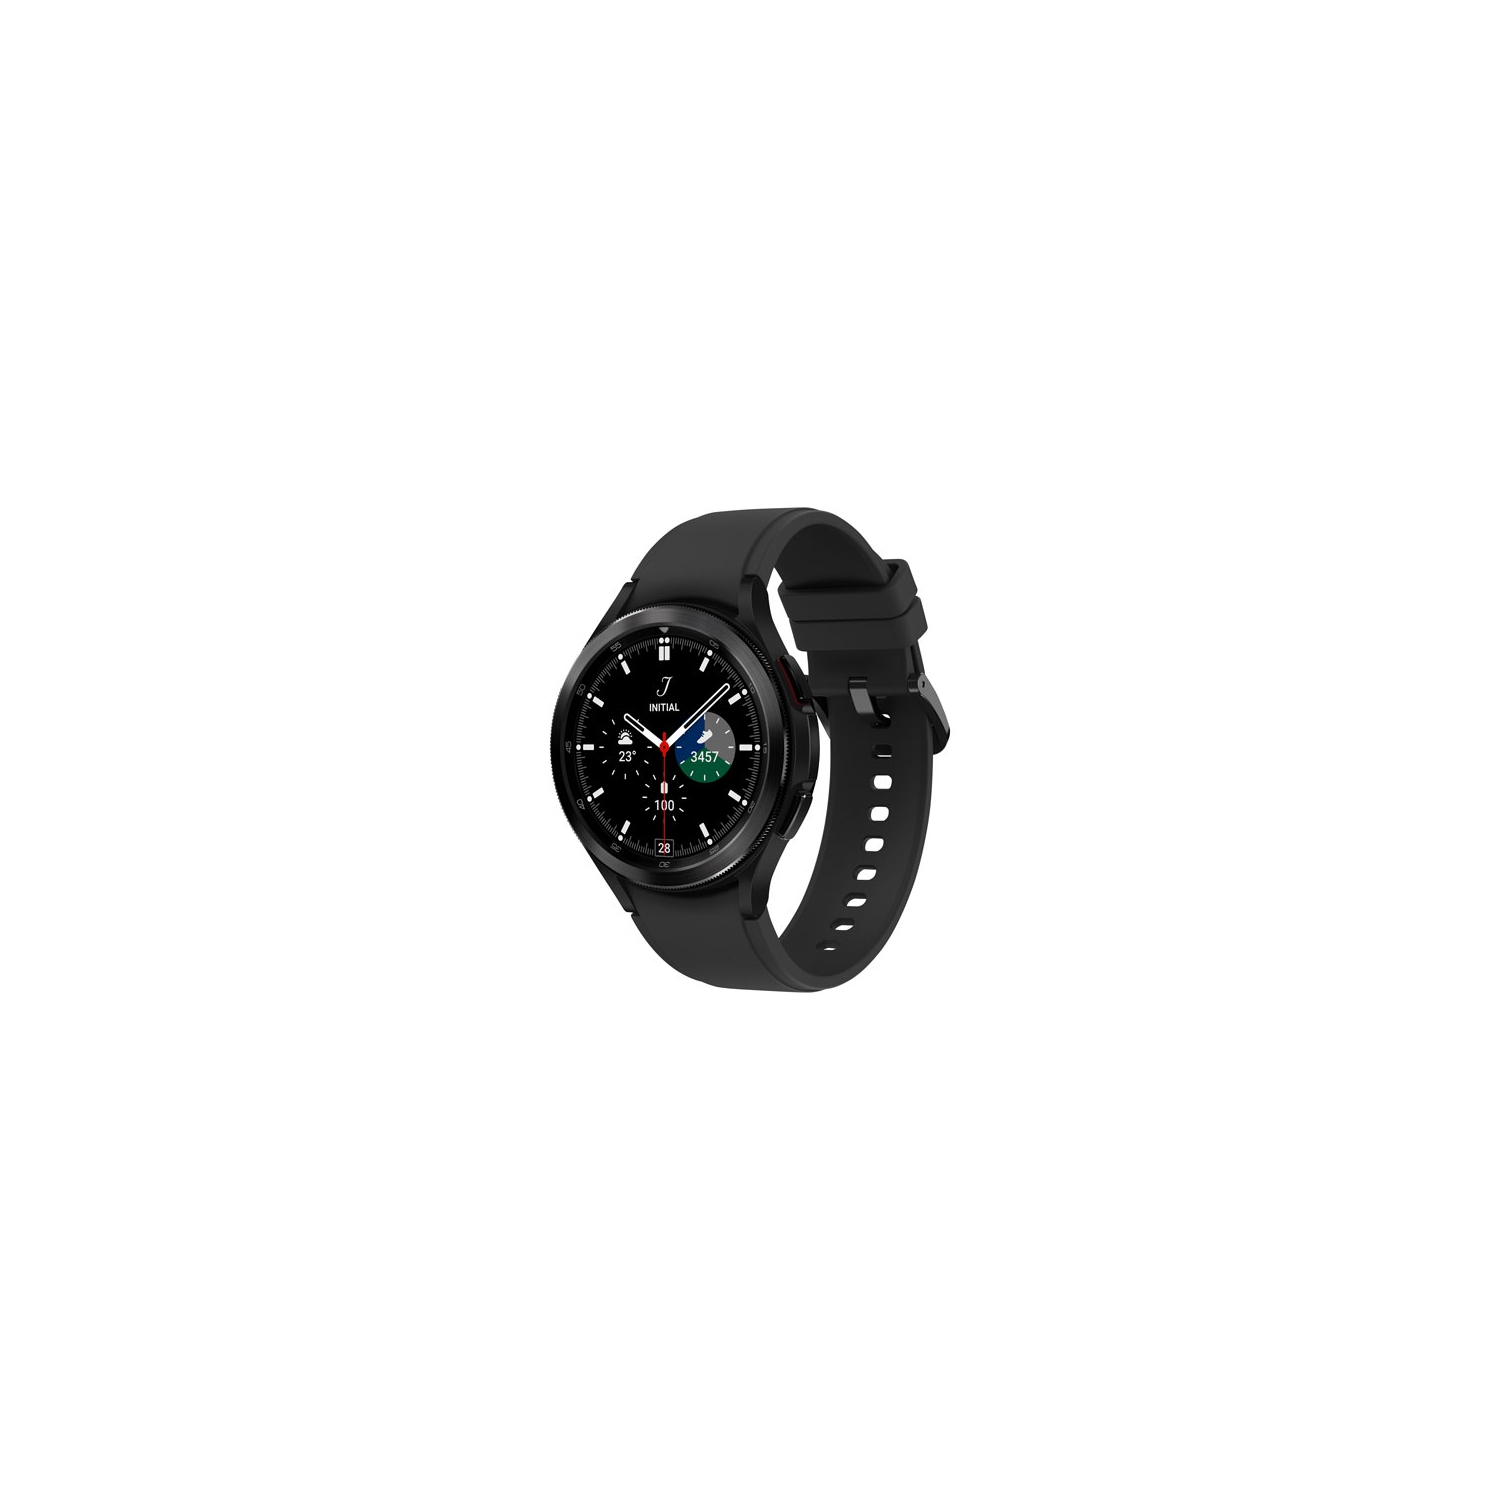 Refurbished (Fair) - Samsung Galaxy Watch4 Classic 46mm Smartwatch with Heart Rate Monitor - Black